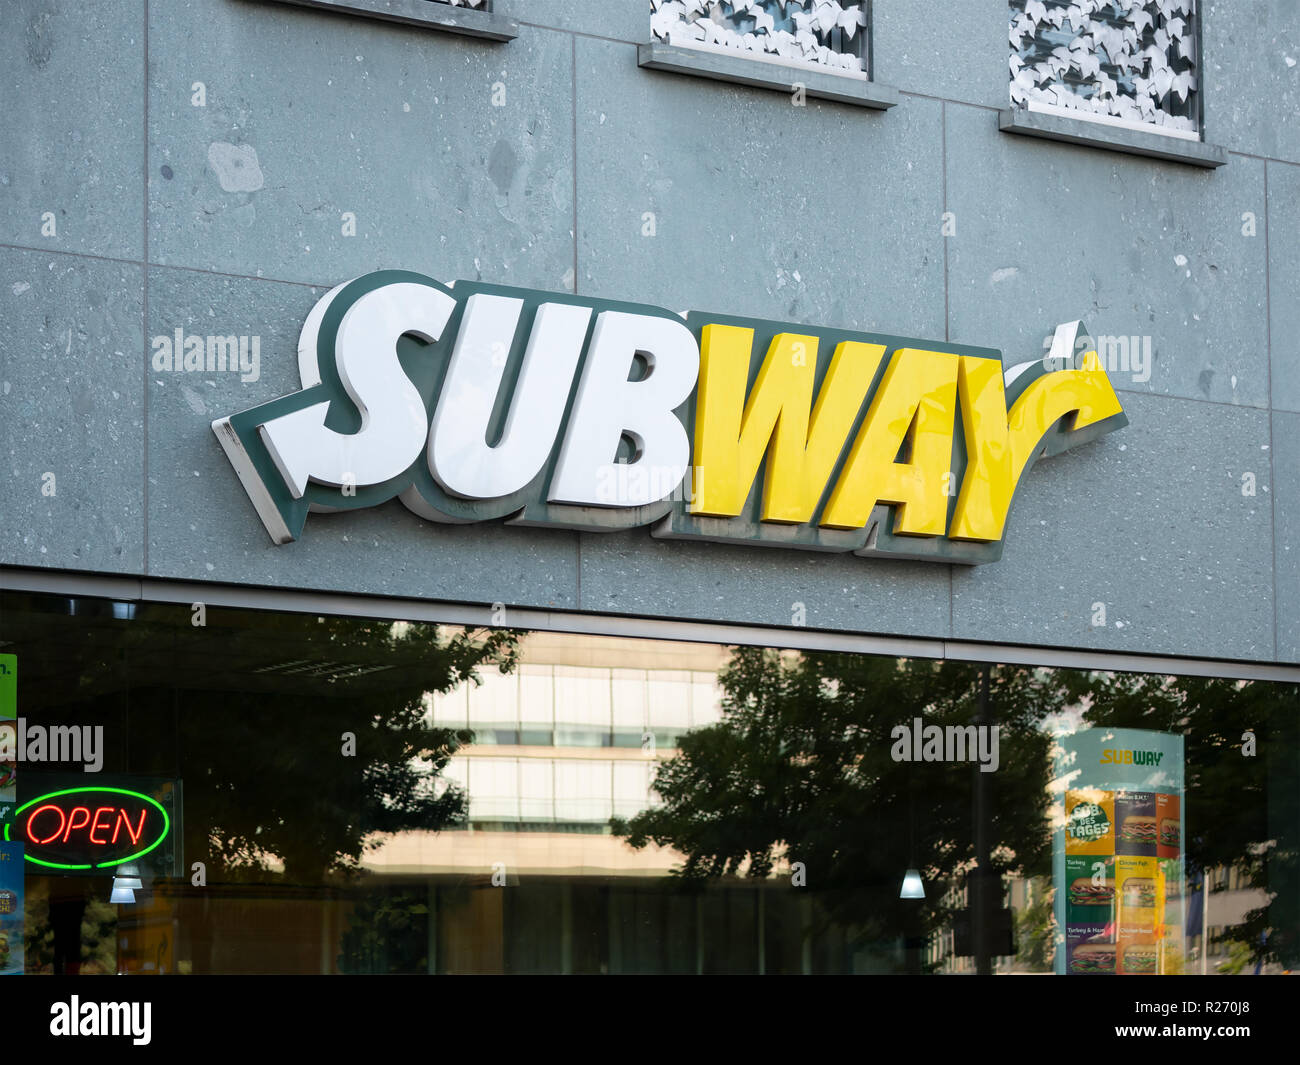 BERLIN, GERMANY - AUGUST 3, 2018: Subway Logo At A Fast Food Restaurant In Berlin, Germany Stock Photo